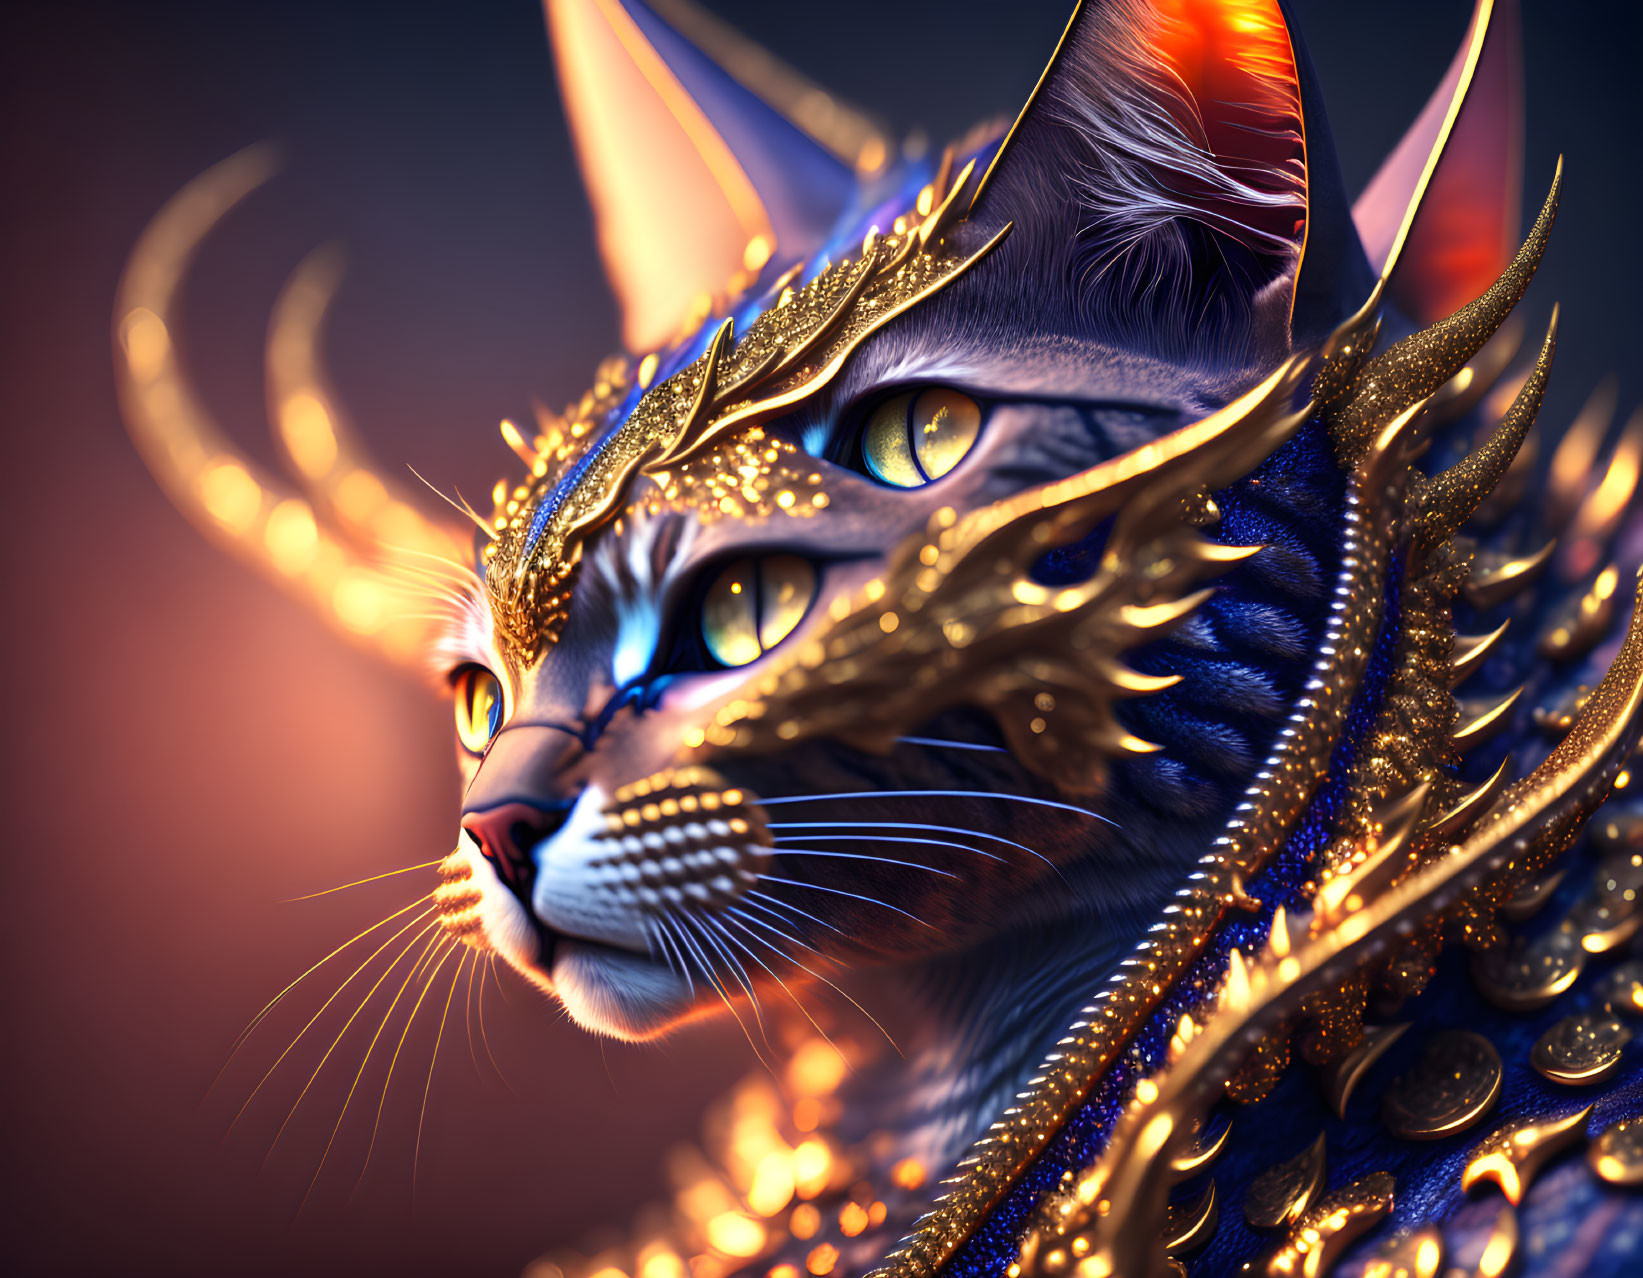 Regal cat with golden armor, crown, glowing blue eyes